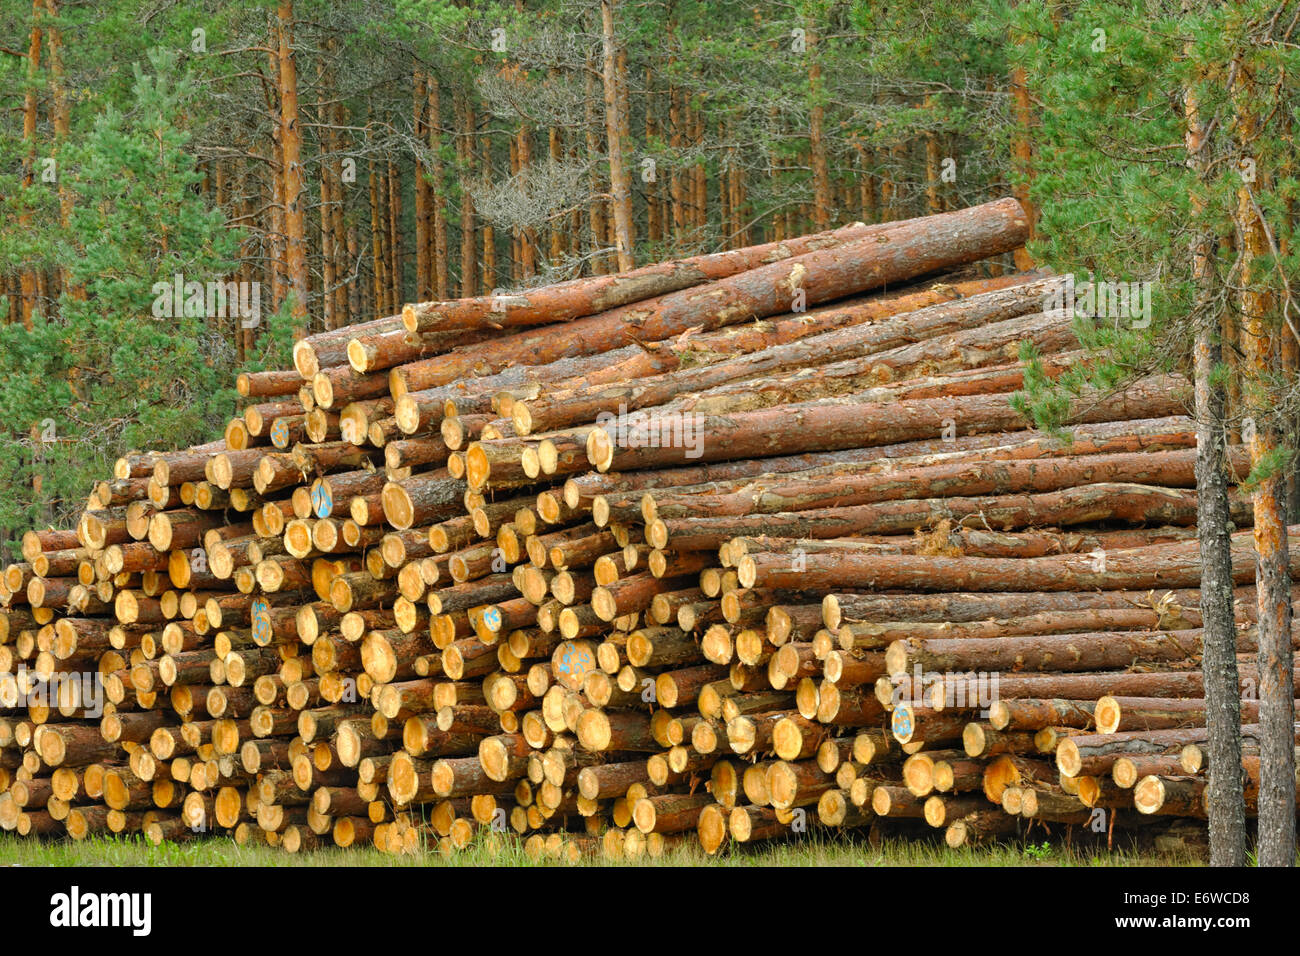 Pine timber, ready for transport from forest Stock Photo